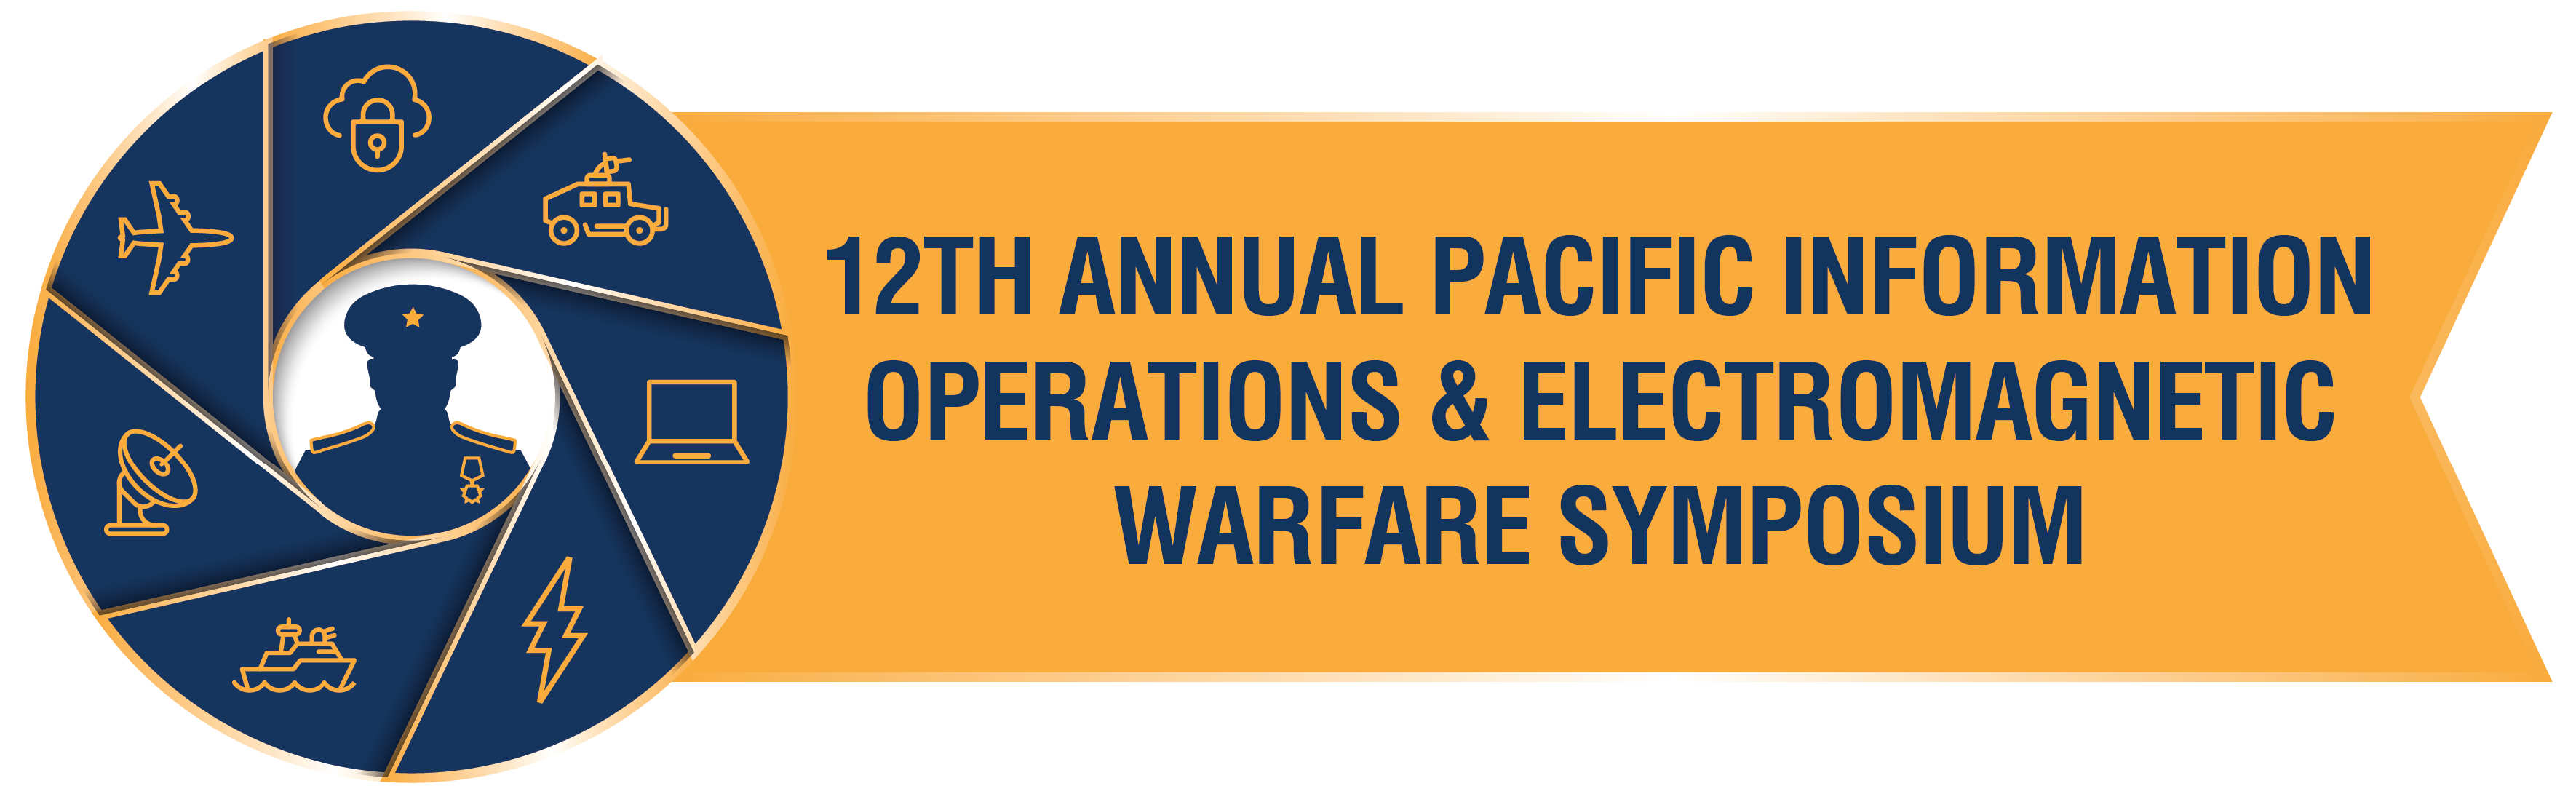 10th Annual Pacific Information Operations & Electromagnetic Warfare Symposium